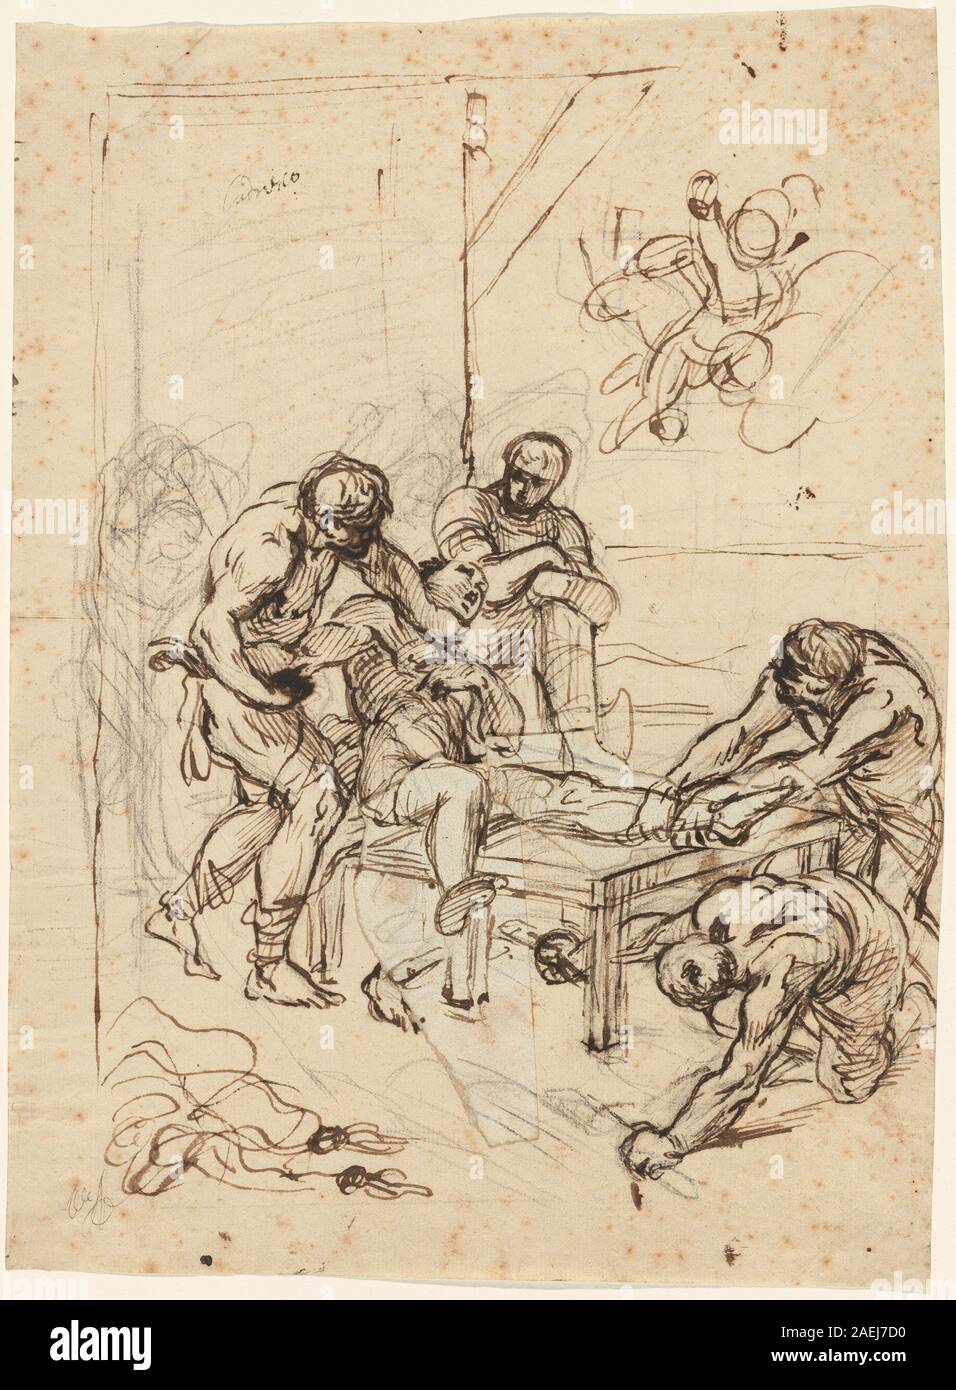 D13344.jpgLodovico Carracci, The Martyrdom of Saint Lawrence Lodovico Carracci (Bolognese, 1555 - 1619), The Martyrdom of Saint Lawrence, pen and brown and gray ink over black chalk on laid paper; with irregularly cut and torn patches attached and drawn with compositional corrections in pen and brown ink and black chalk, Joseph F. McCrindle Collection 2009.70.92 Stock Photo